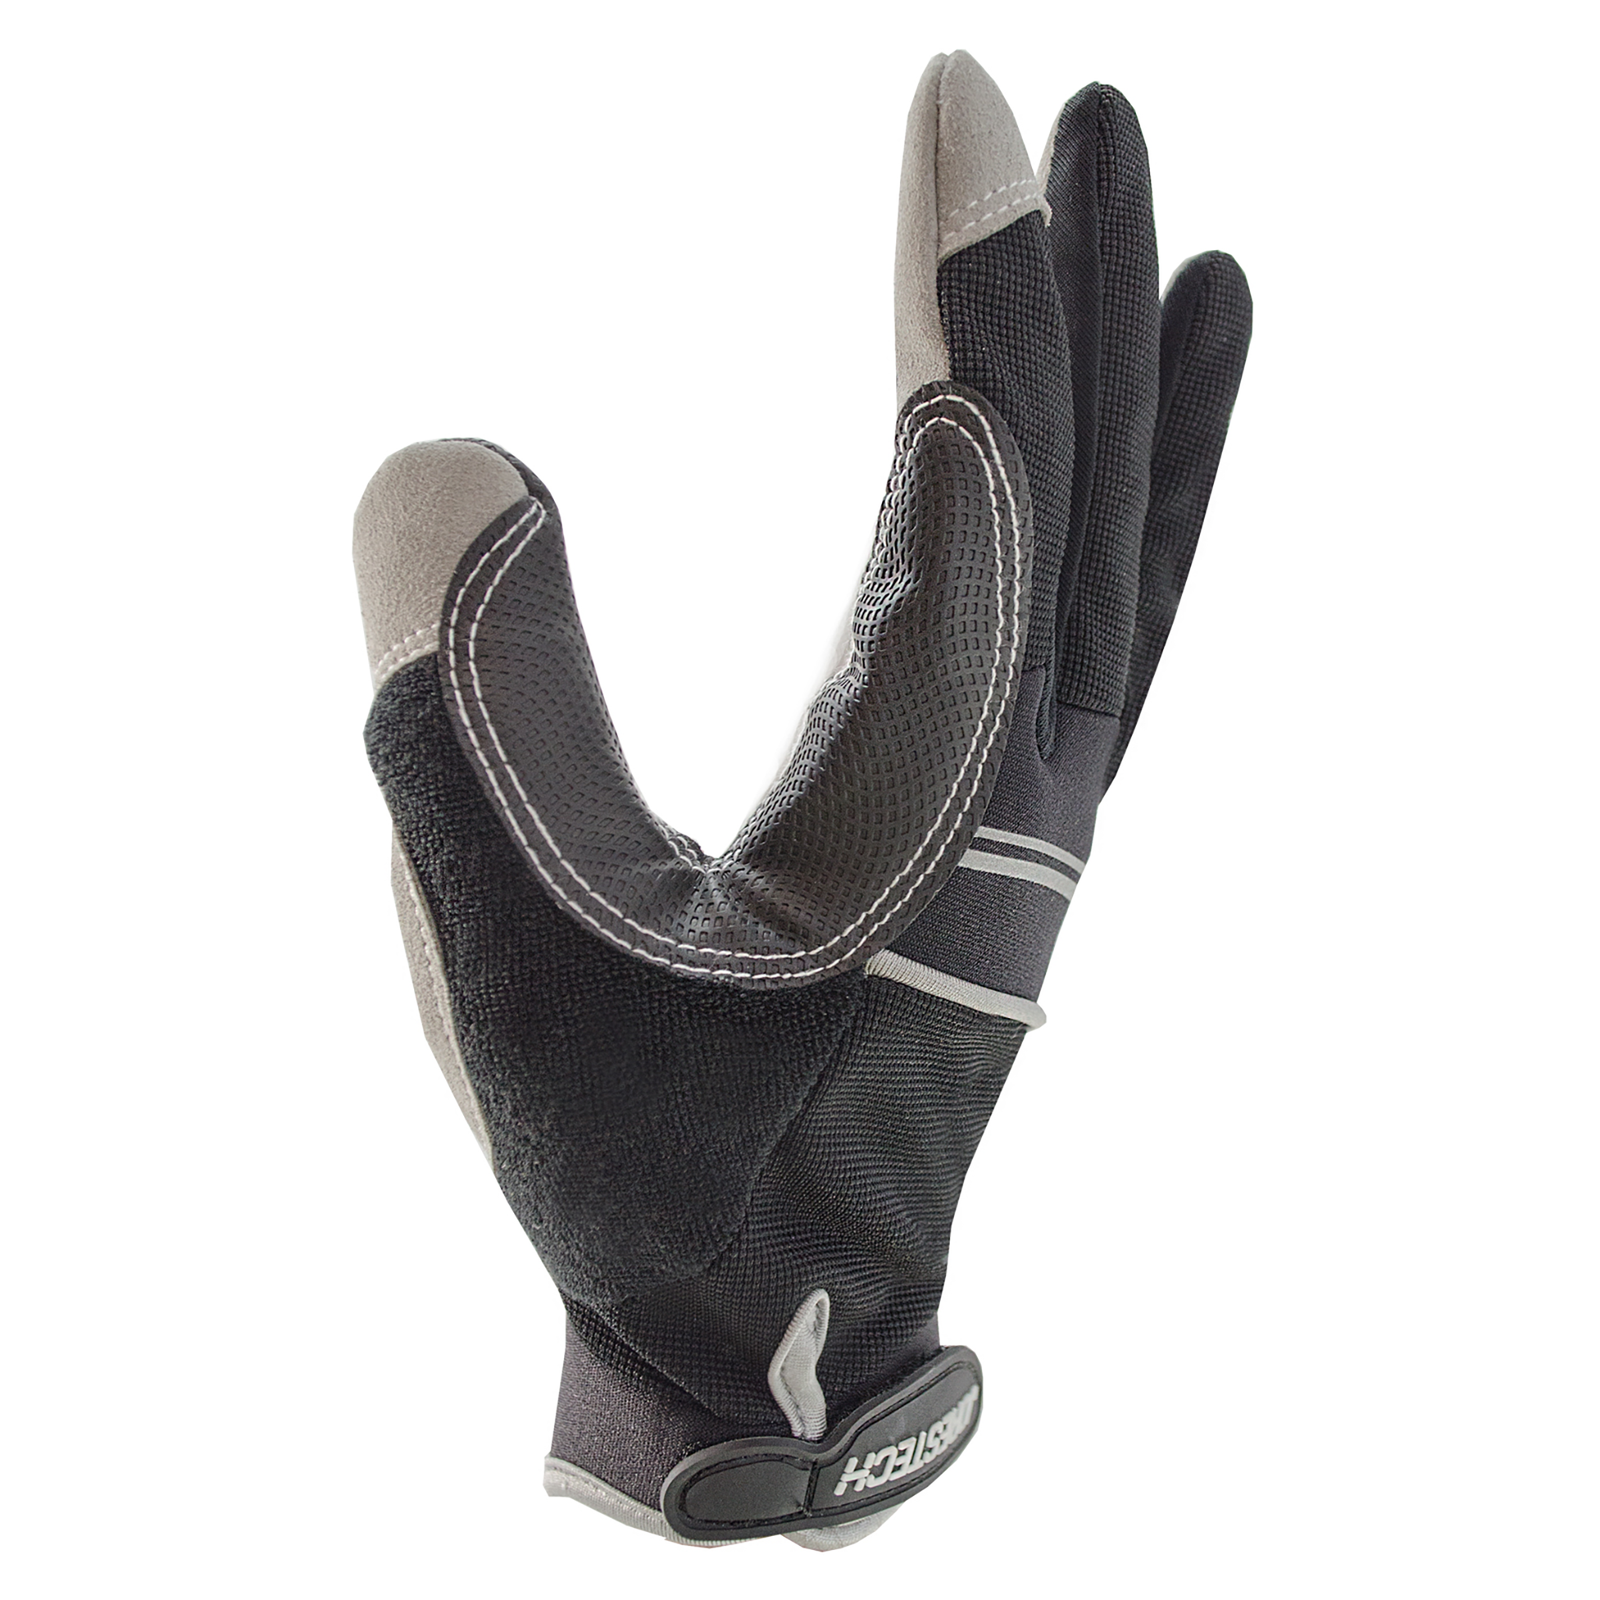 Side view of 1 black JORESTECH safety work glove with anti slip silicone black dotted palms